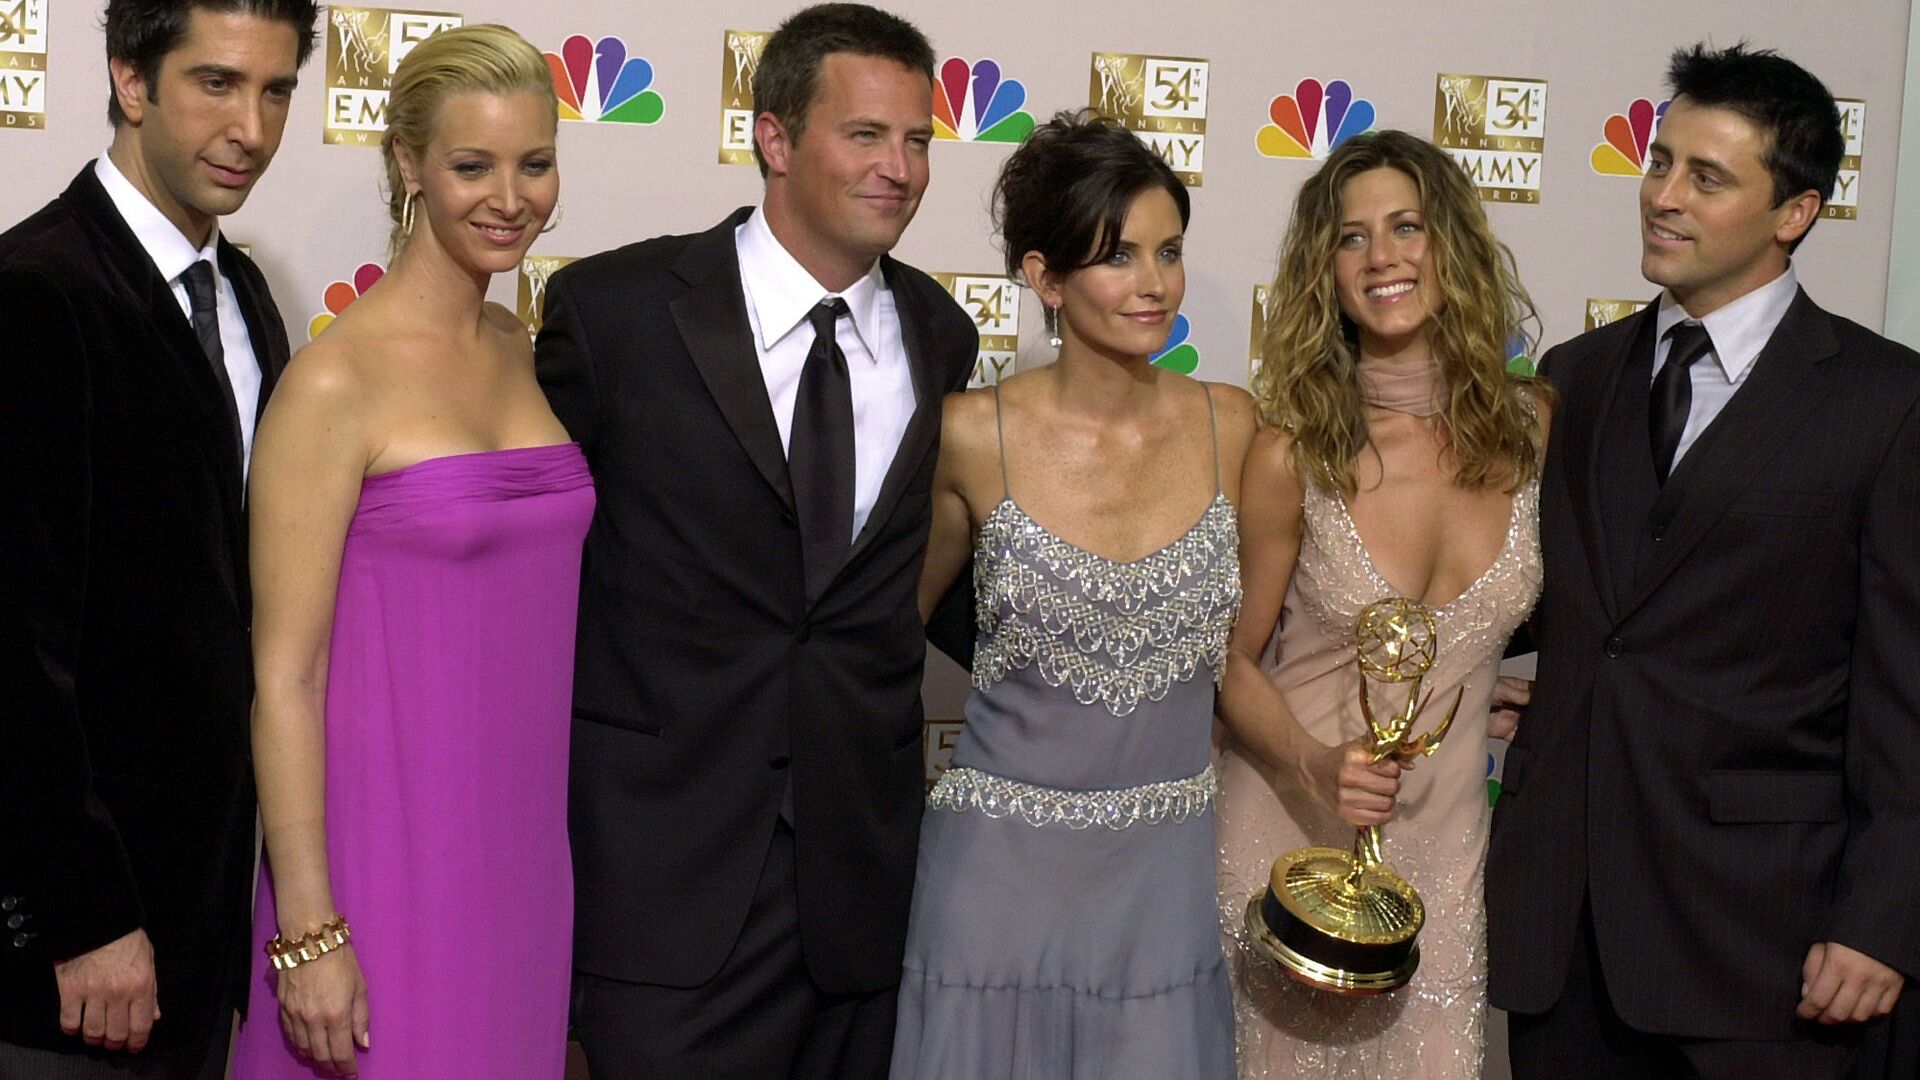 the cast of Friends, from left, David Schwimmer, Lisa Kudrow, Matthew Perry, Courteney Cox, Jennifer Aniston and Matt LeBlanc pose in the press room with the award for outstanding comedy series at the 54th annual Primetime Emmy Awards in Los Angeles - Sputnik International, 1920, 29.05.2021